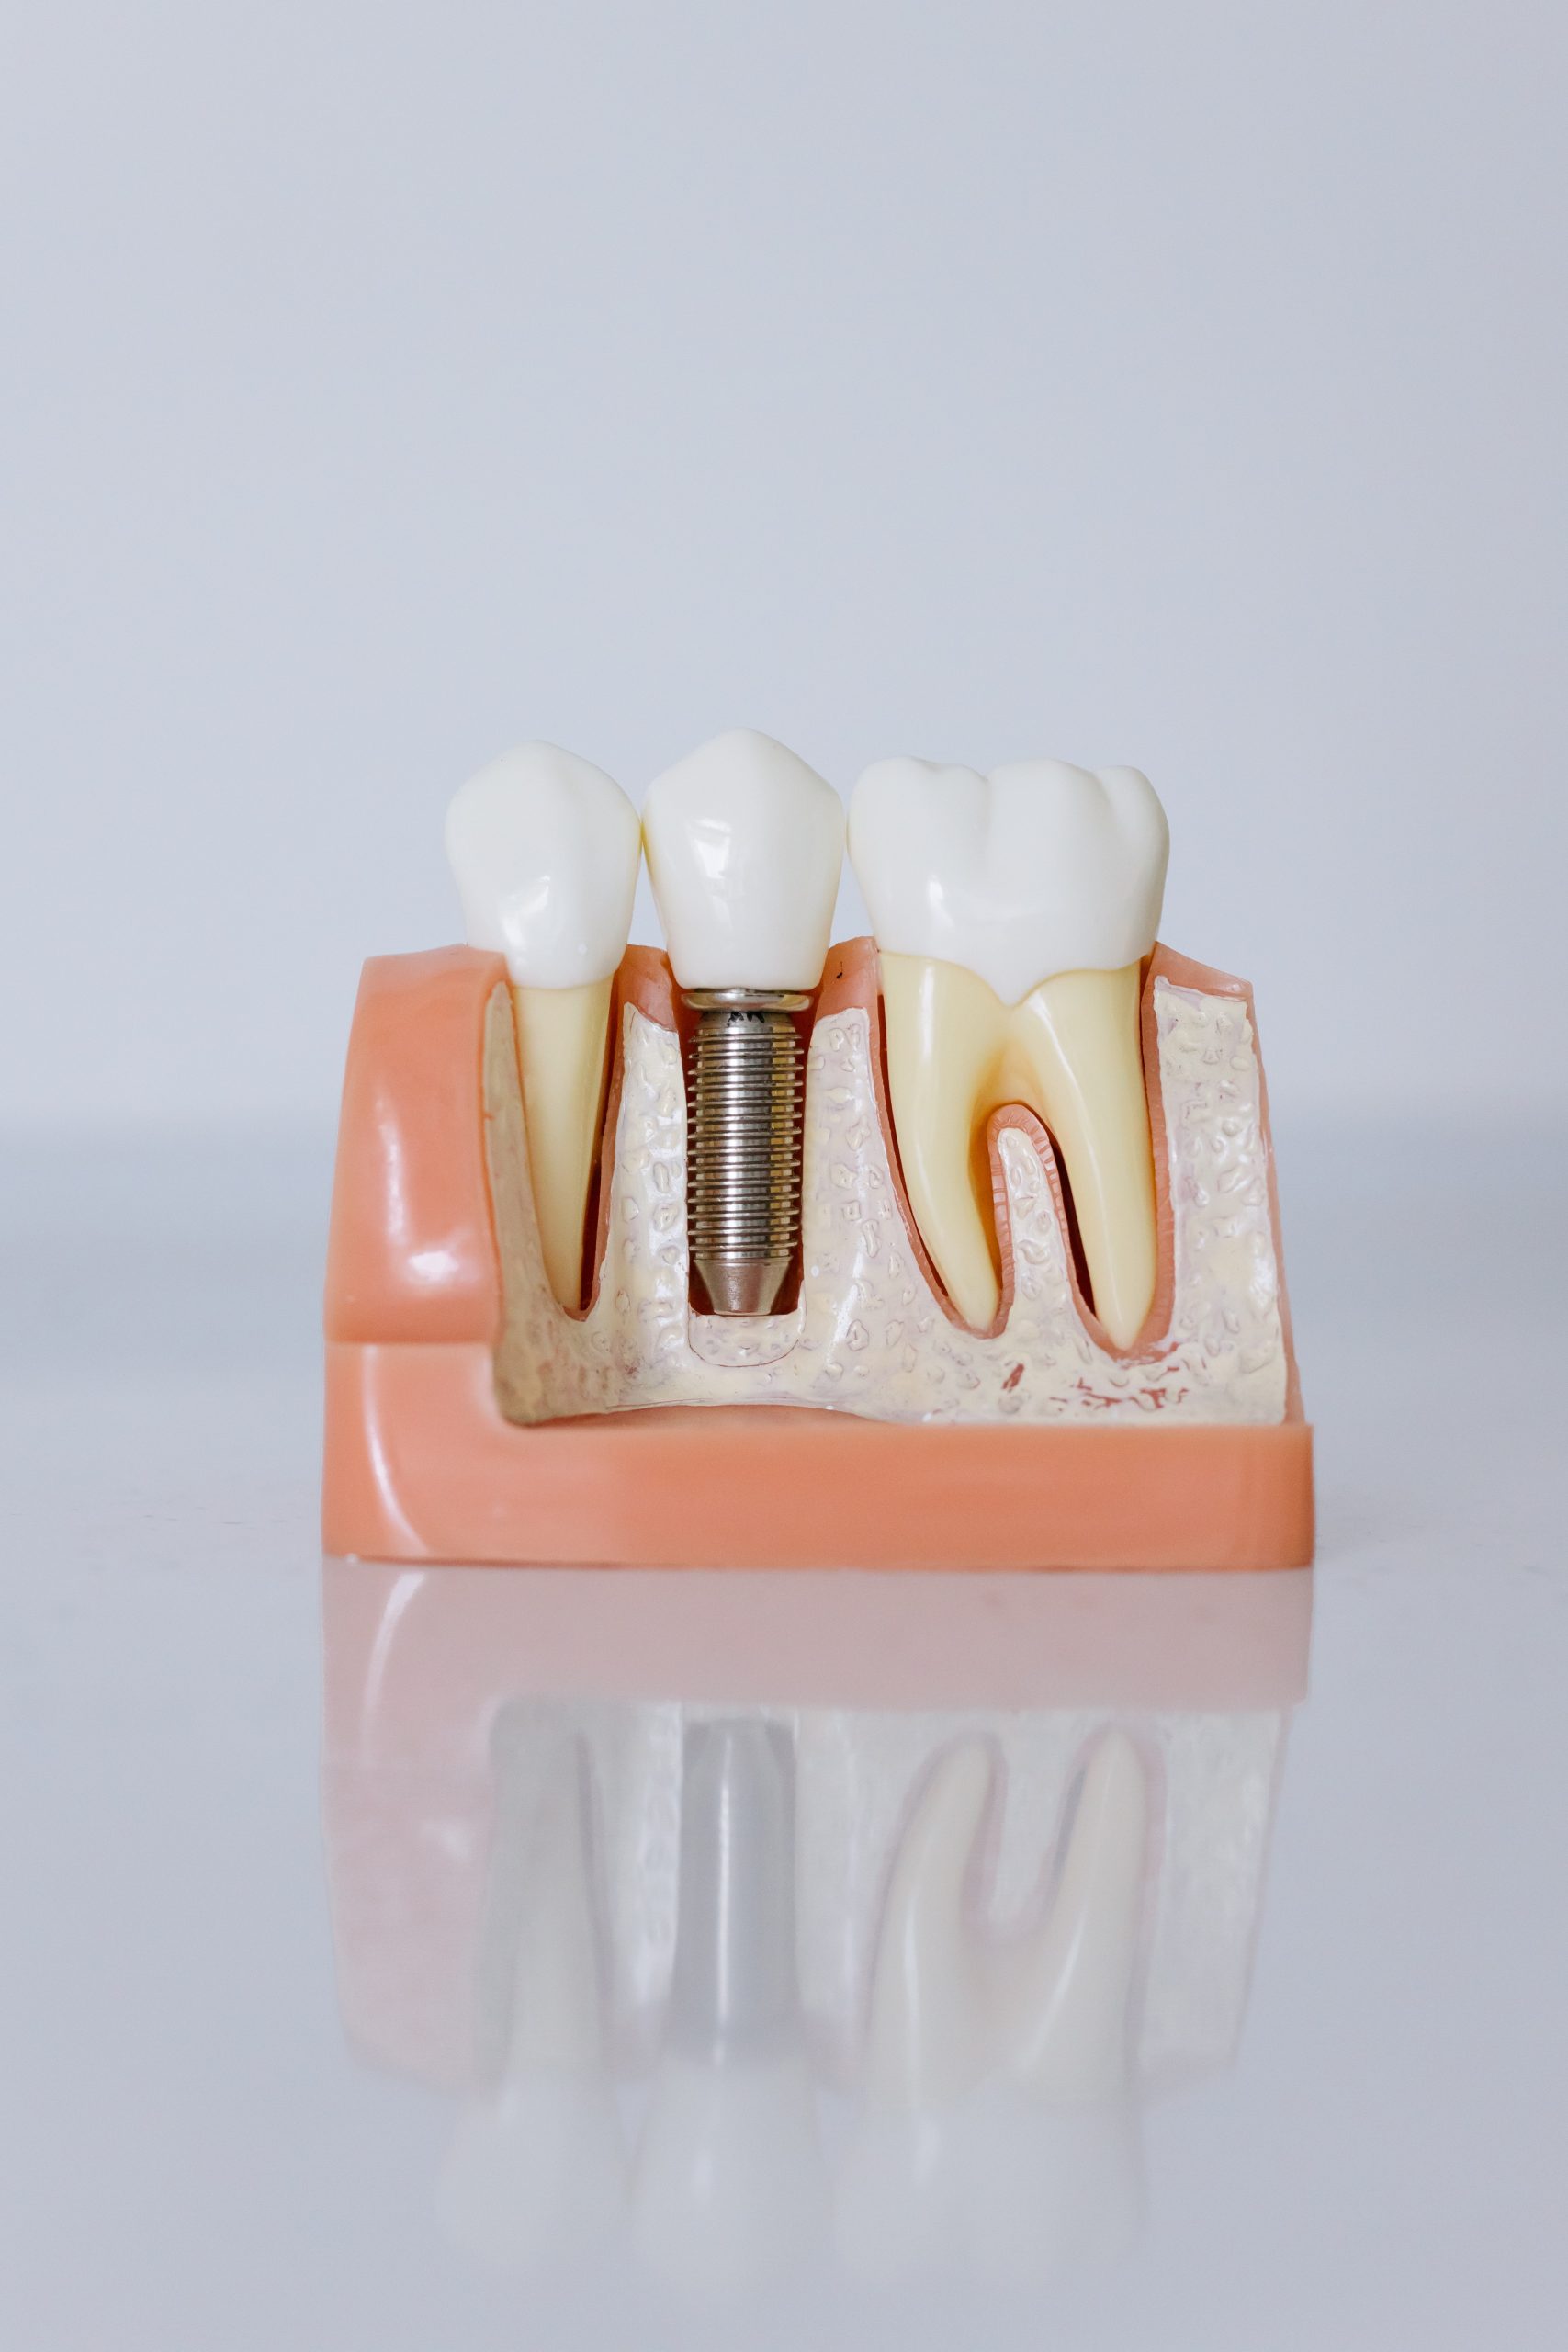 Are You A Candidate For Dental Implants? Discovering Your Path To A Lasting Smile